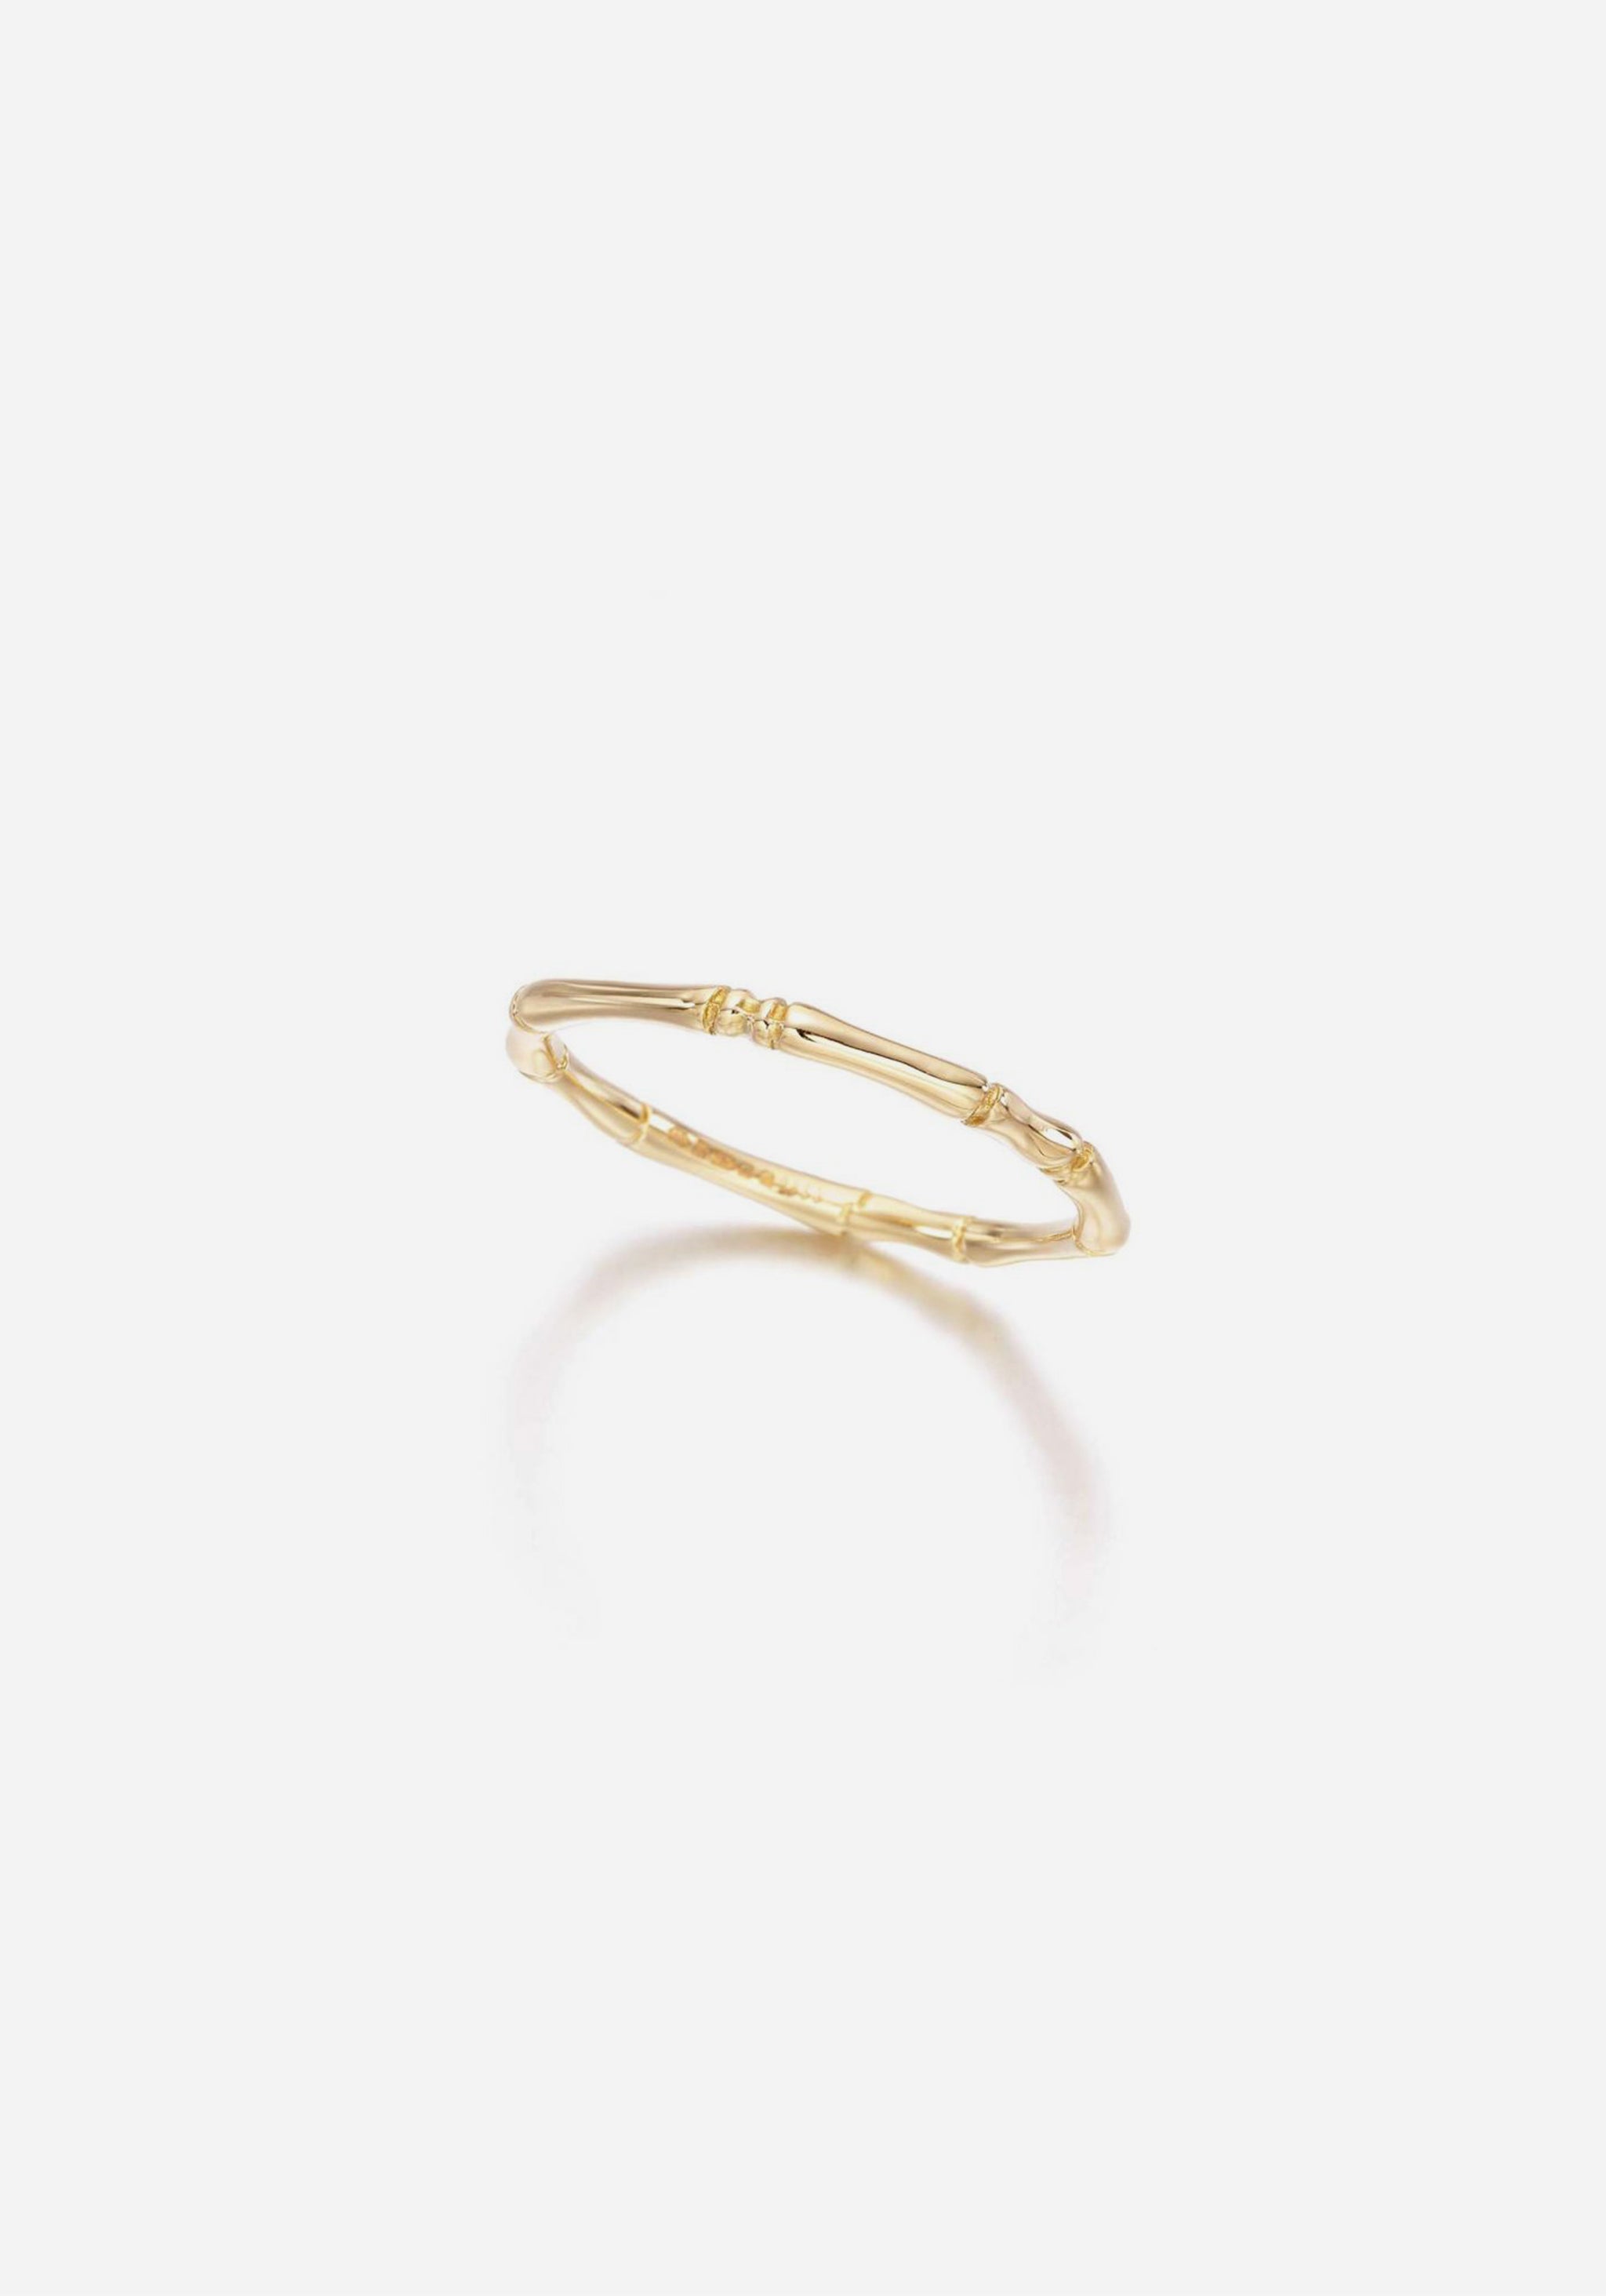 Bamboo Ring - Fine Band Yellow Gold